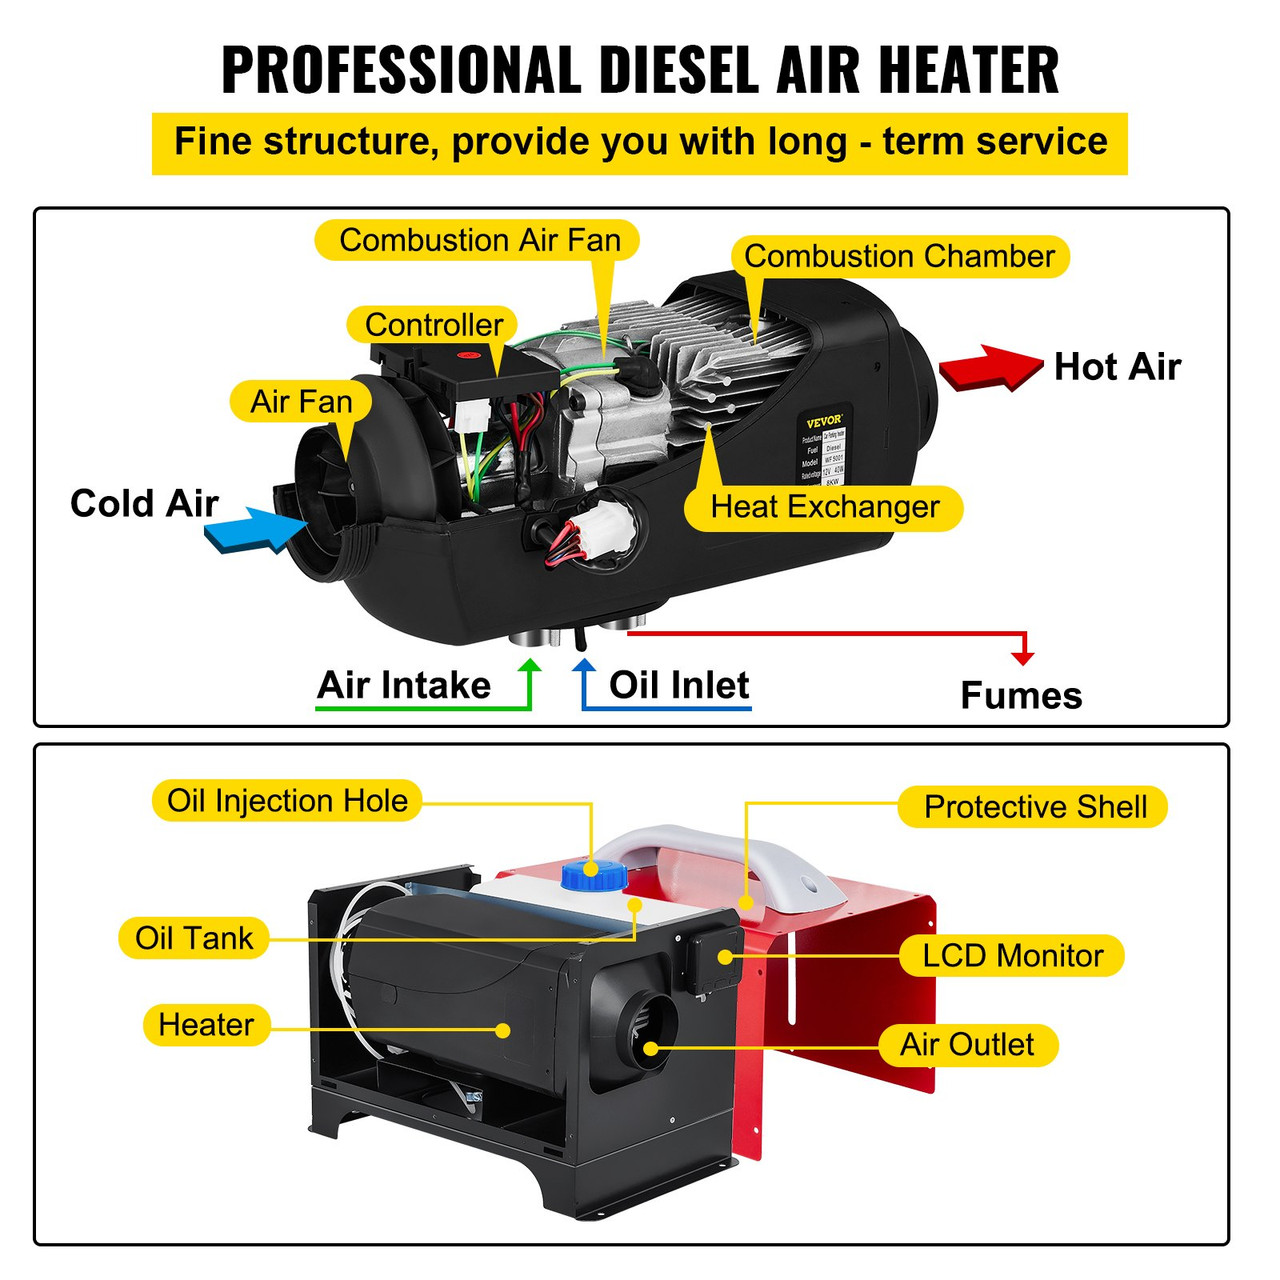 Diesel Air Heater All in One, 8KW Diesel Heater 12V, Fast Heating, Diesel Parking Heater with Black LCD & Remote Control for RV Truck, Boat, Bus, Trailer and Motorhomes